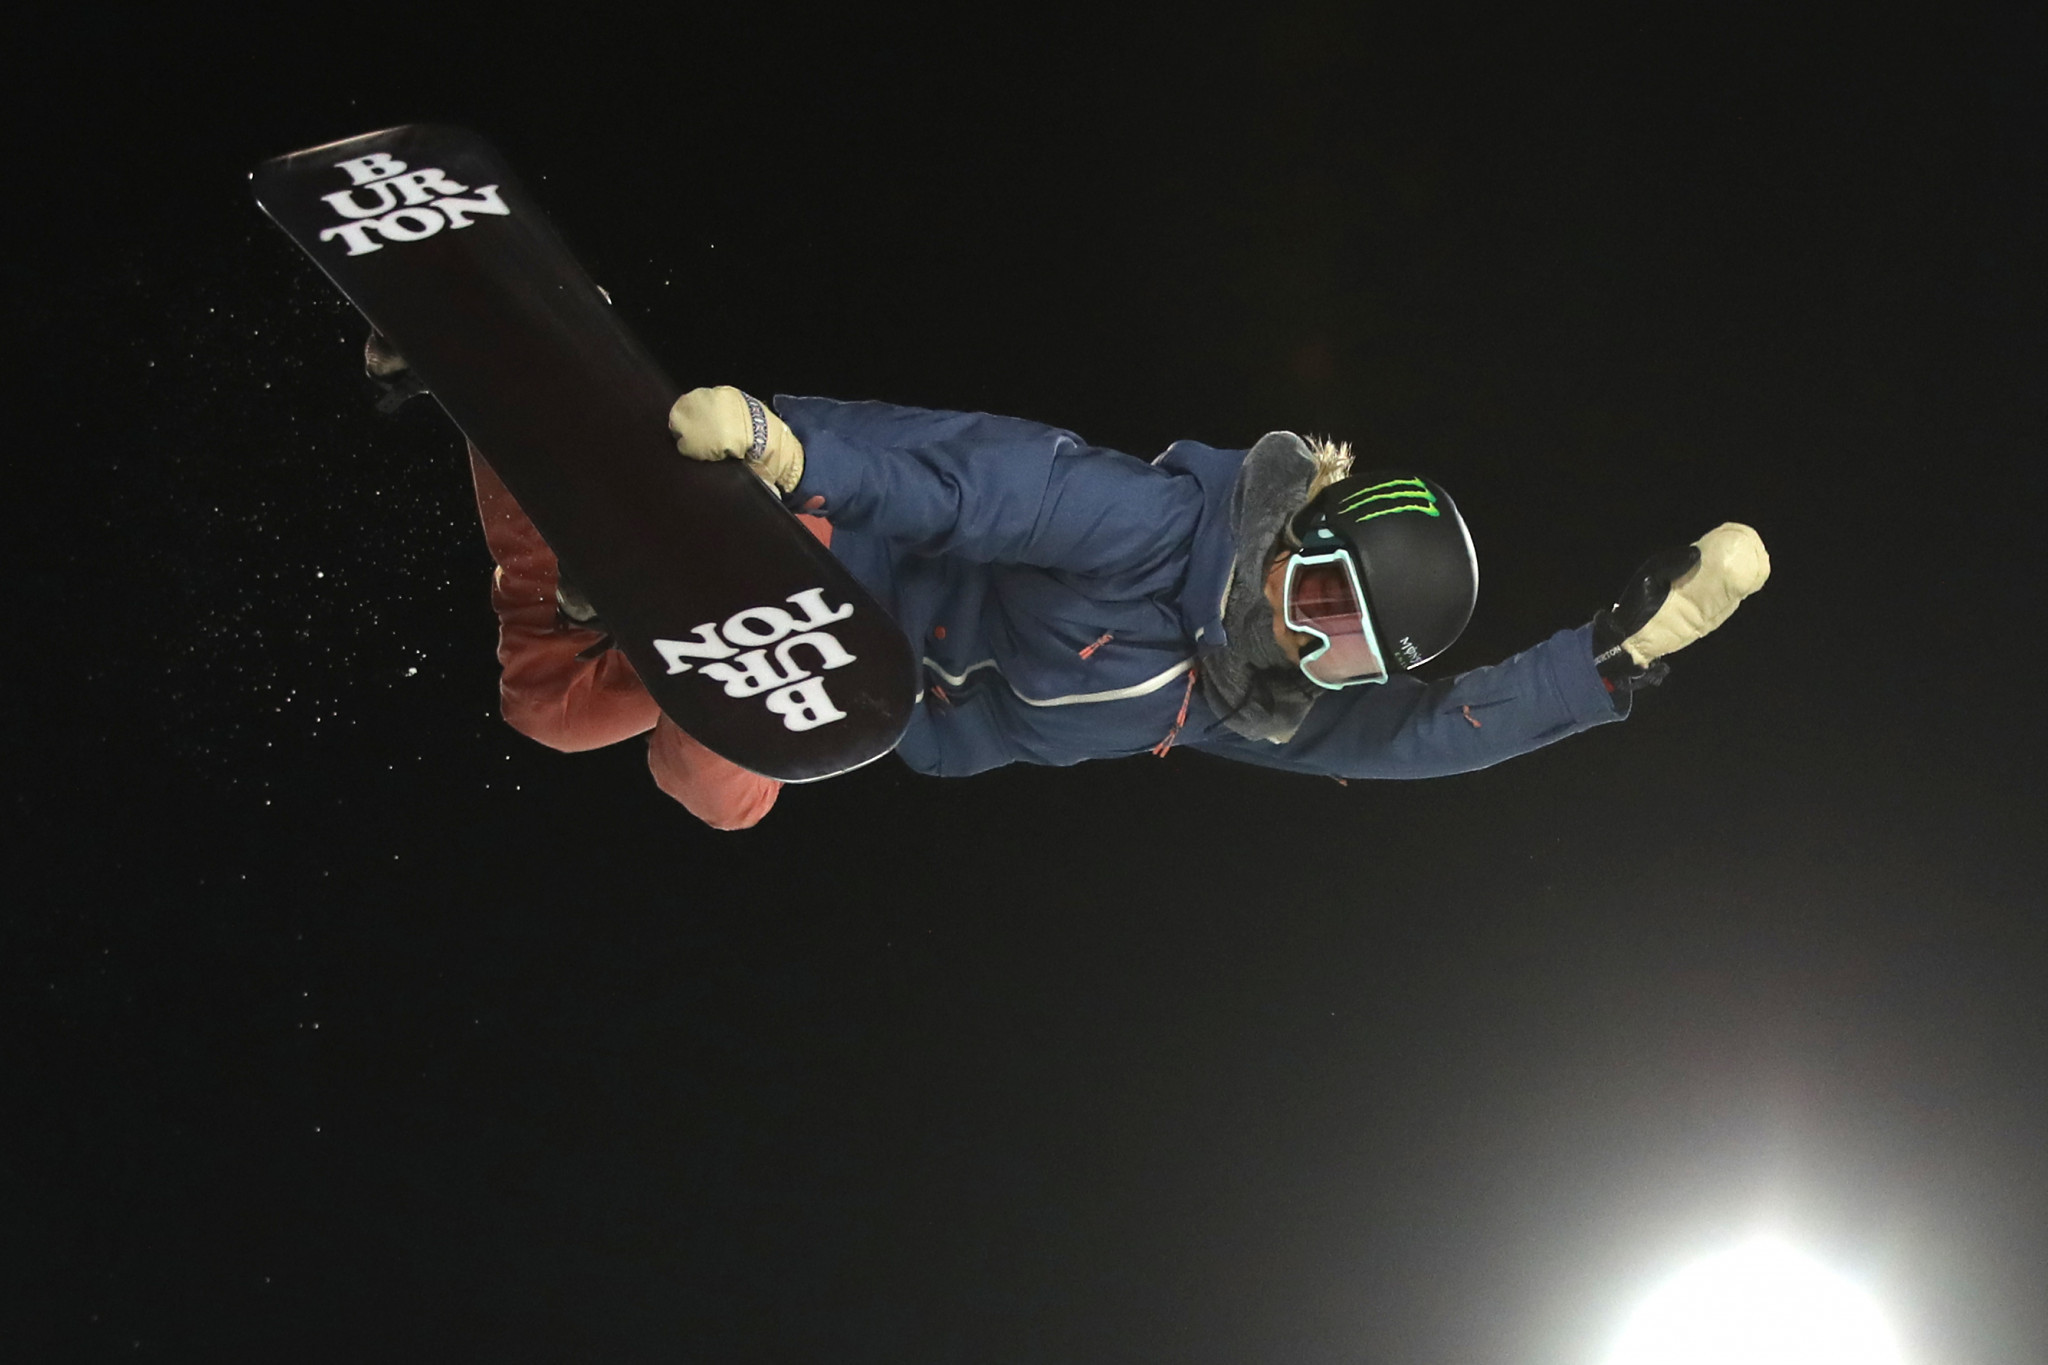 Kim wins fifth X Games superpipe title as Gu adds another gold